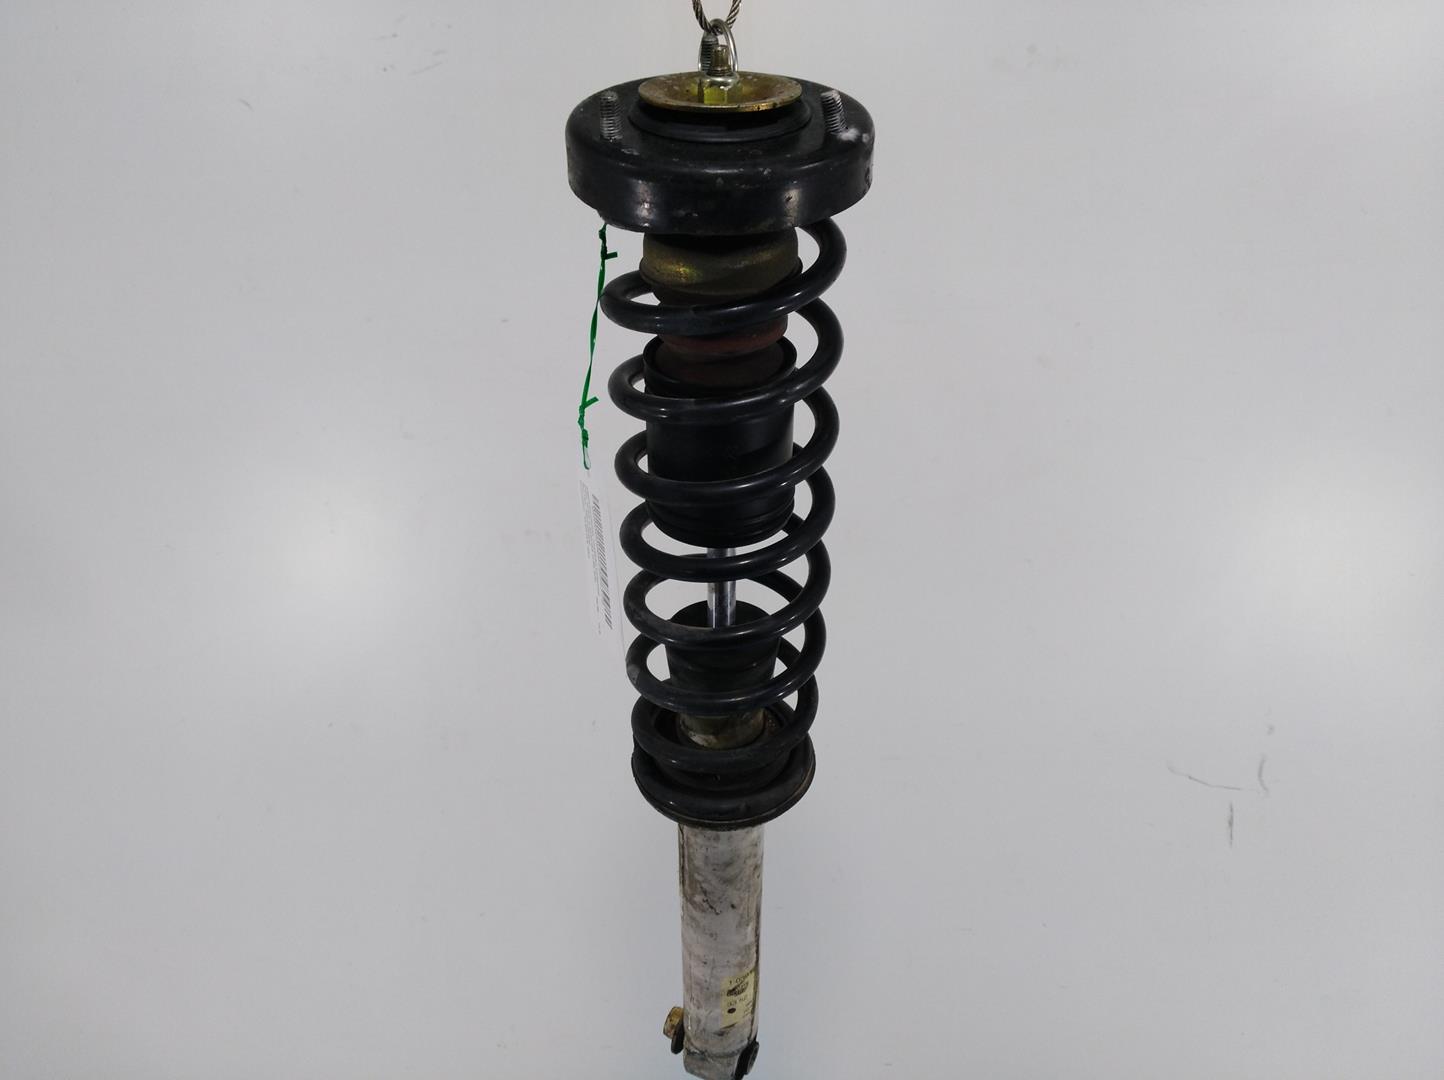 BMW 5 Series E39 (1995-2004) Rear Right Shock Absorber 33521093646, 33521093646, 33521093646 24666900